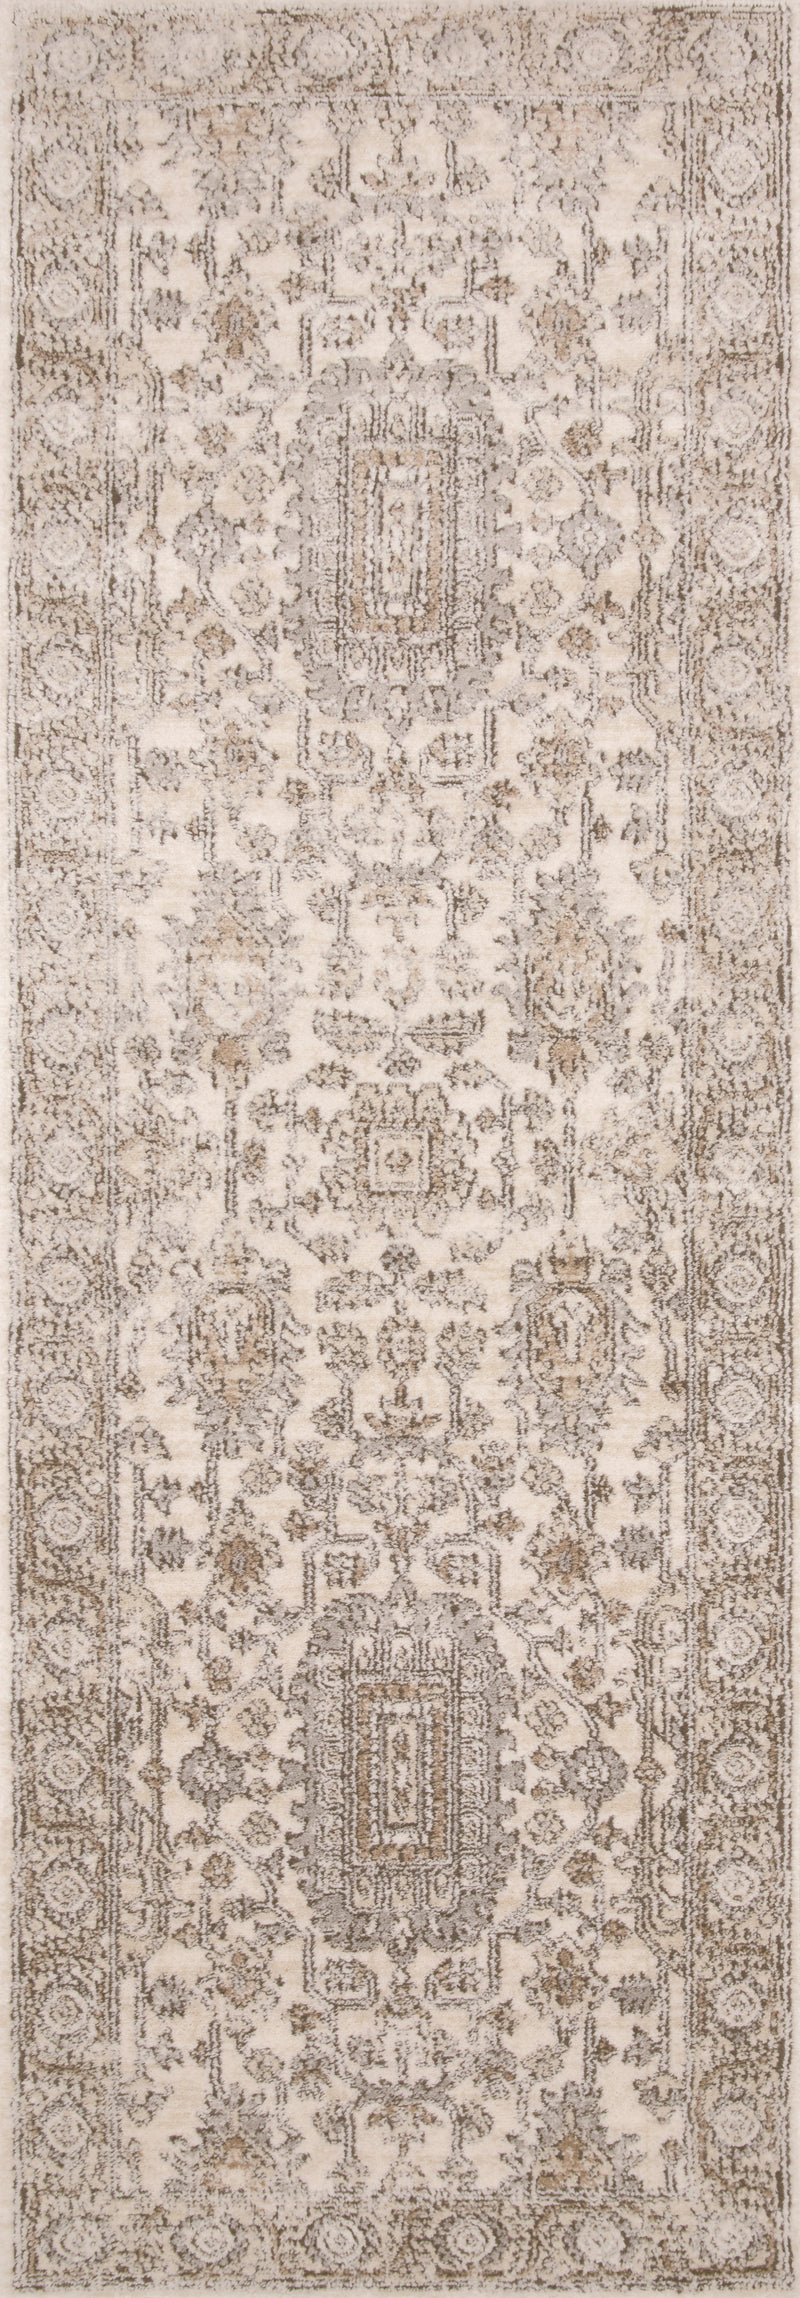 media image for Teagan Rug in Ivory / Sand by Loloi II 248